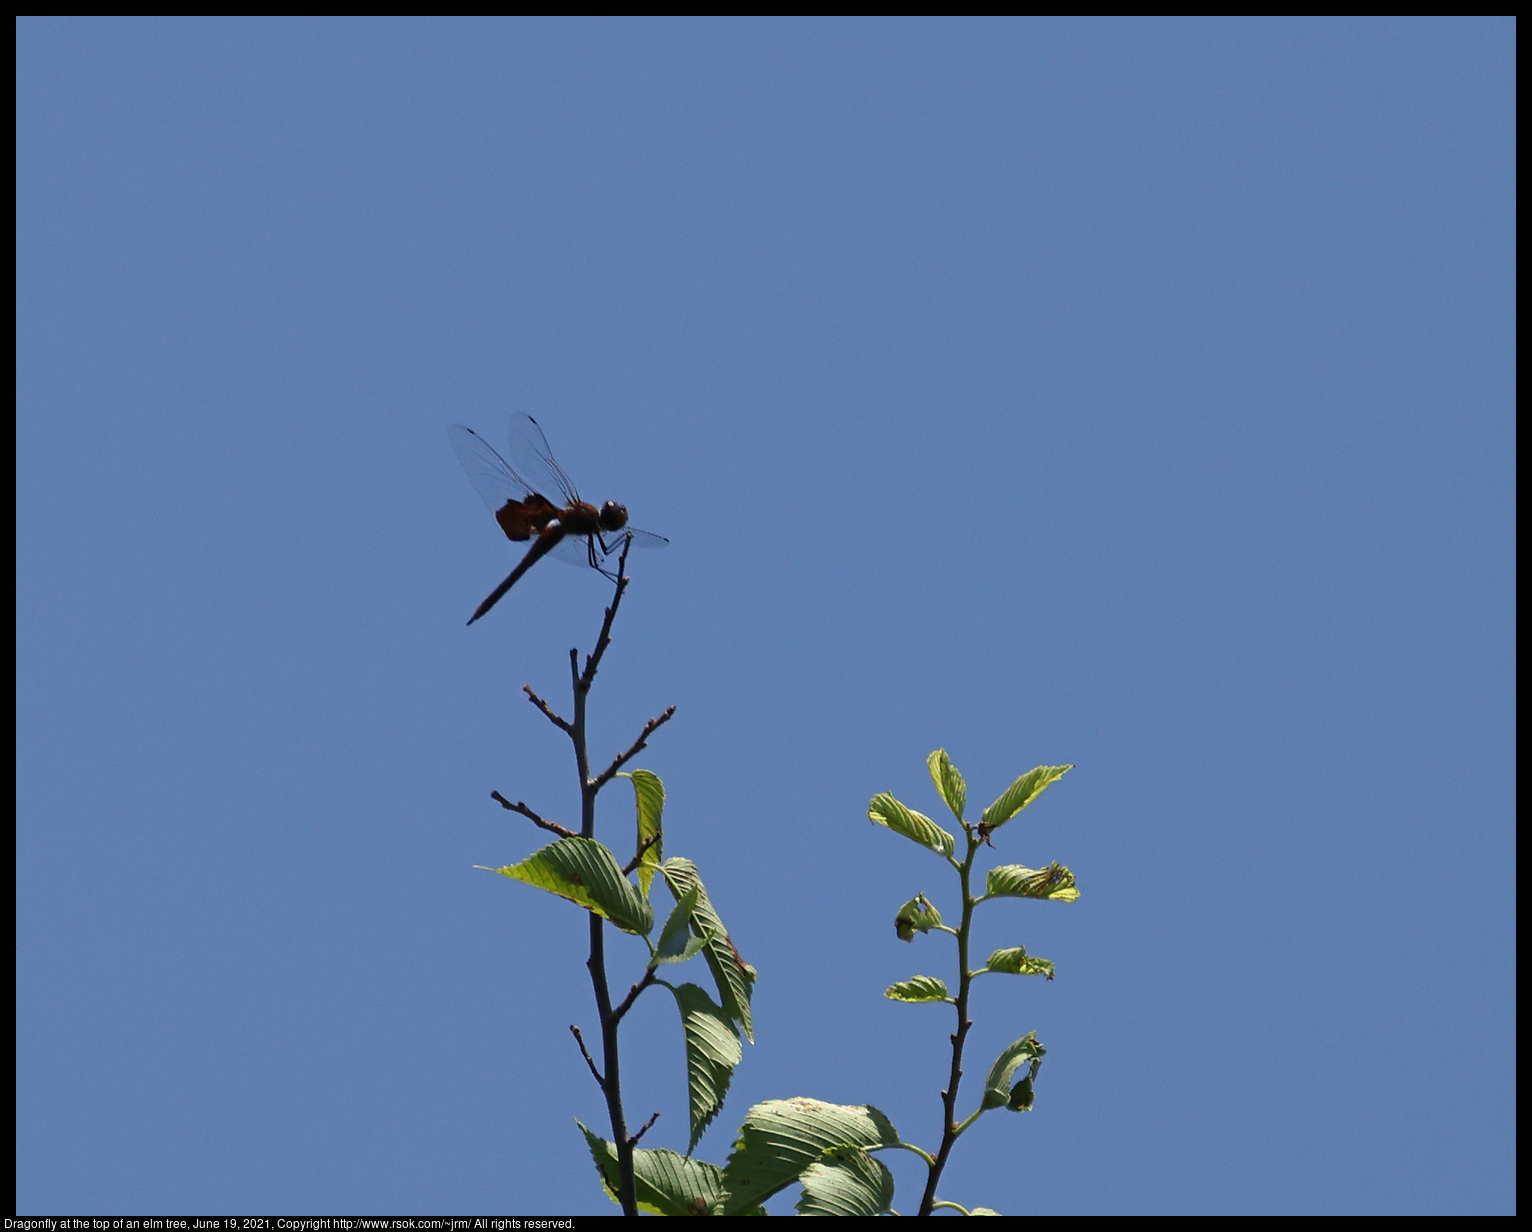 Dragonfly at the top of an elm tree, June 19, 2021